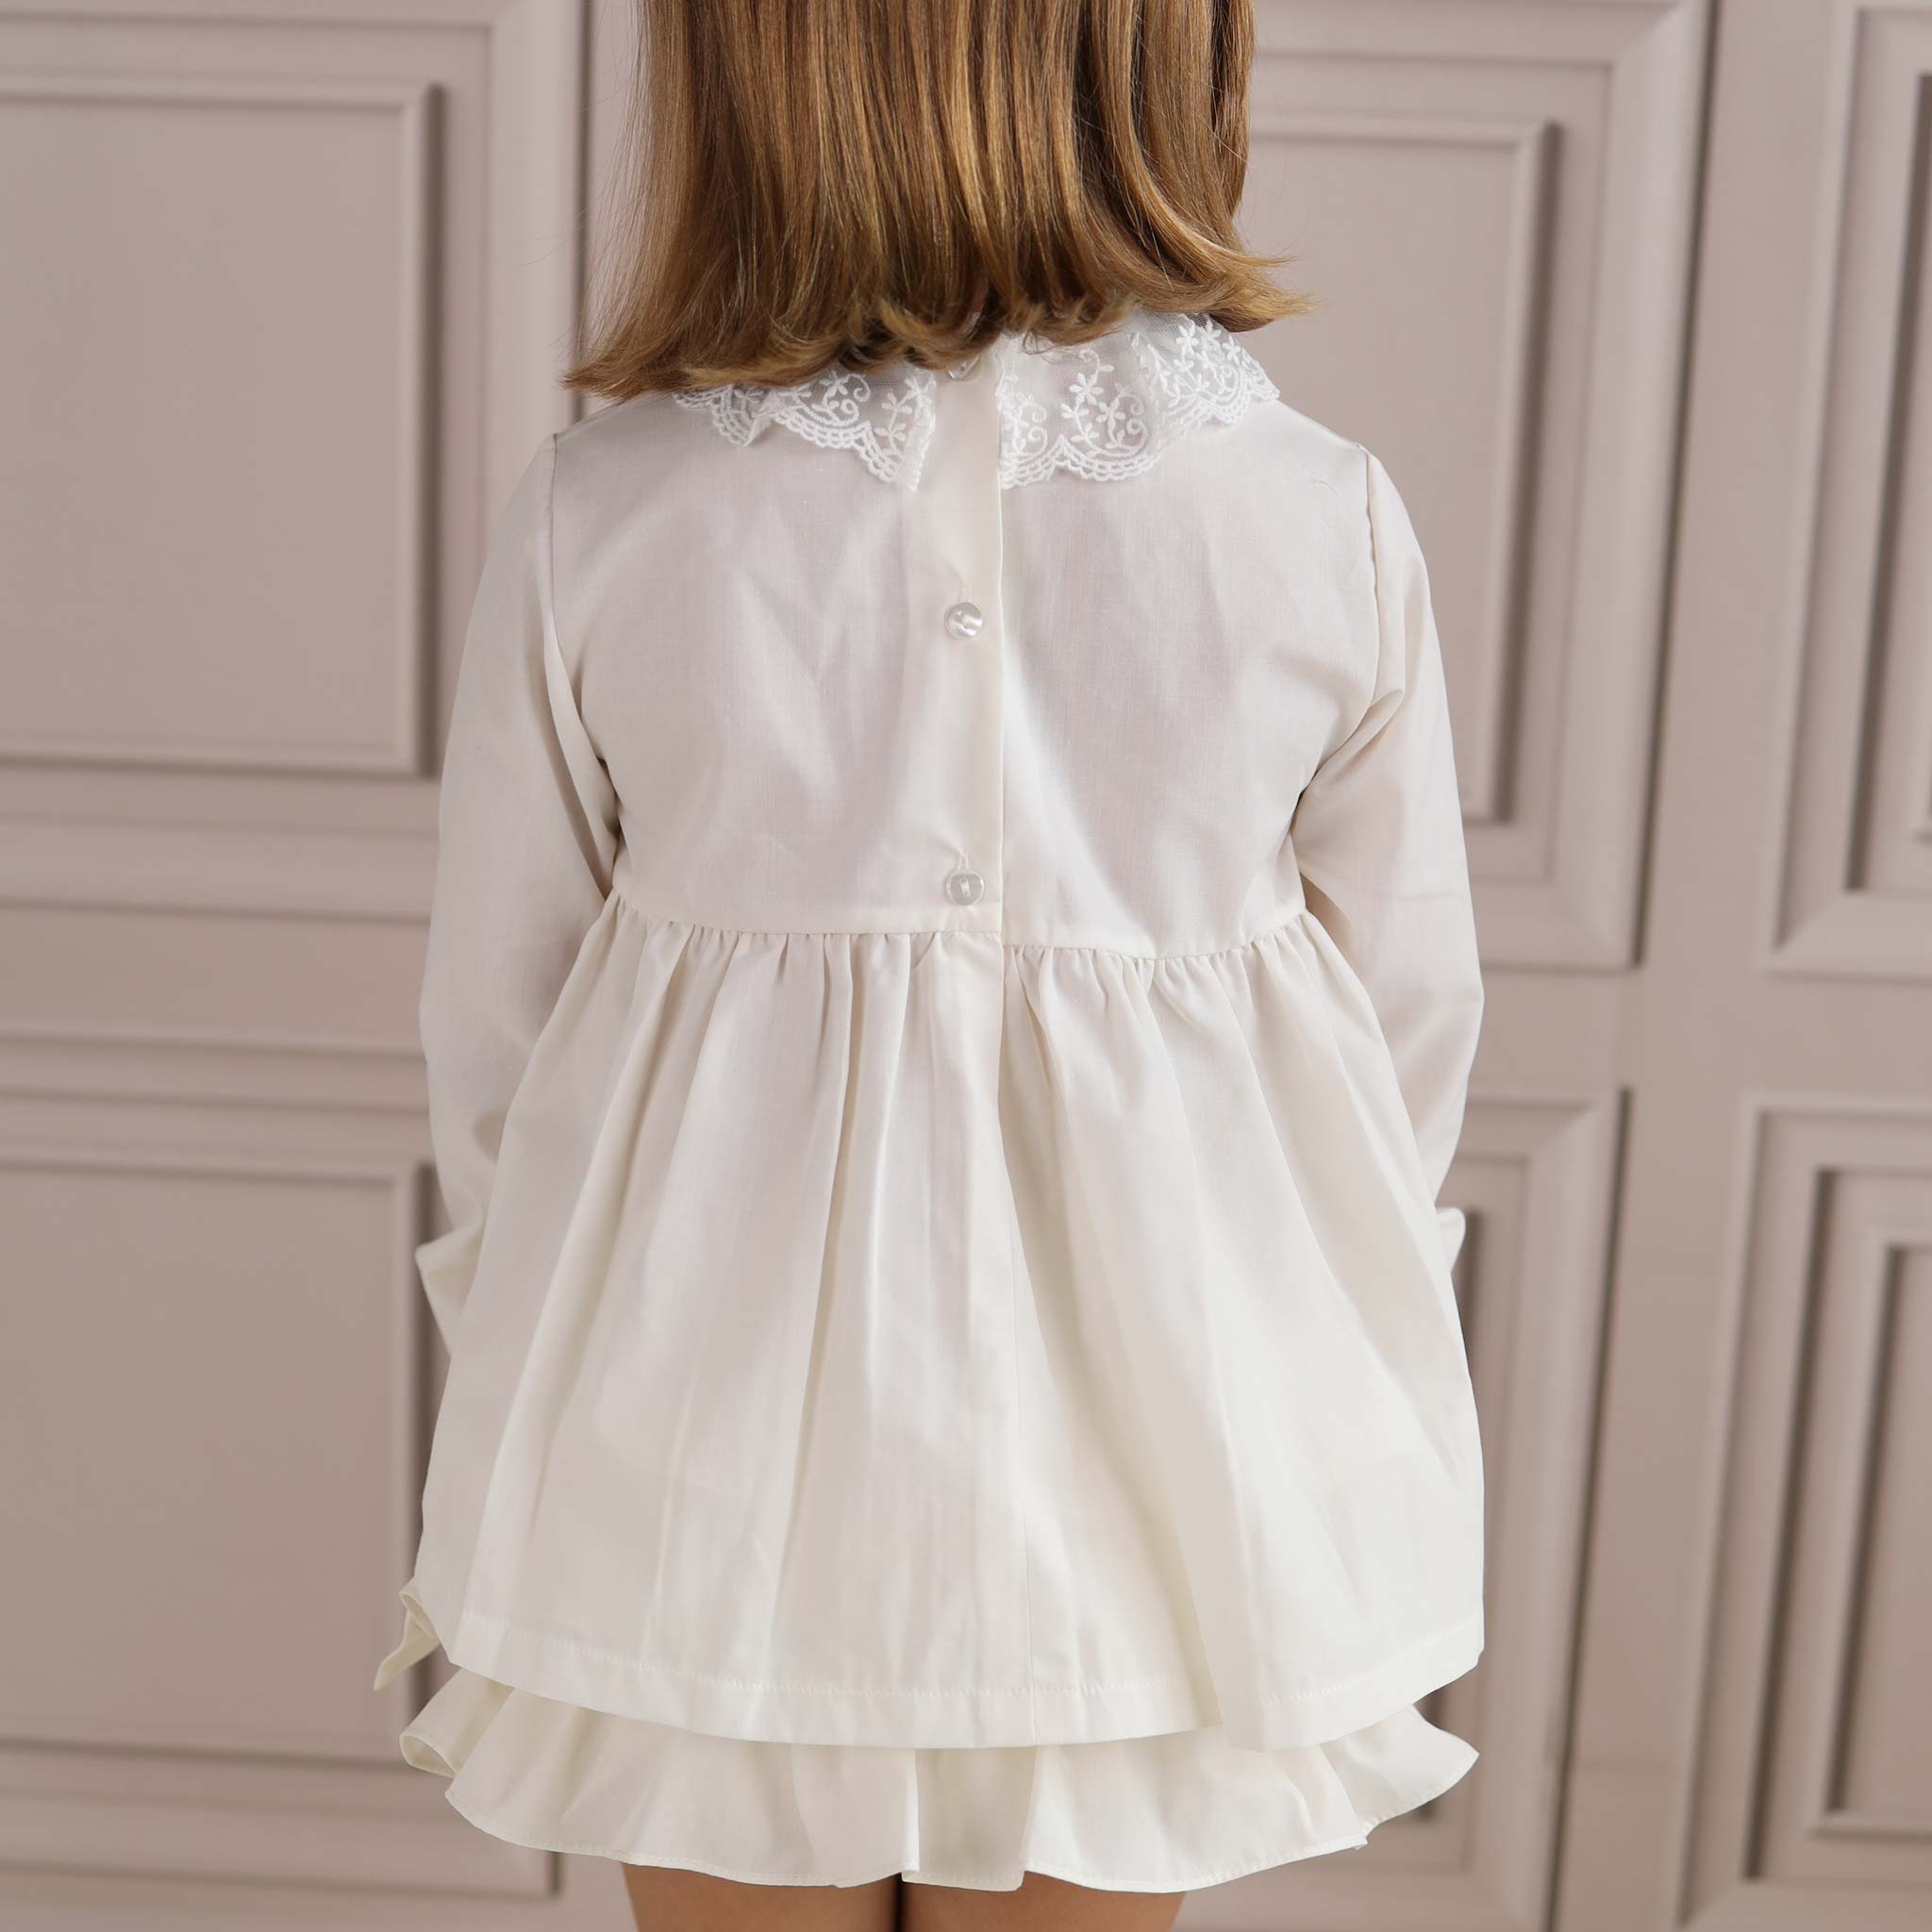 Lace Collar Girls Blouse - Ivory (6M-4Y)